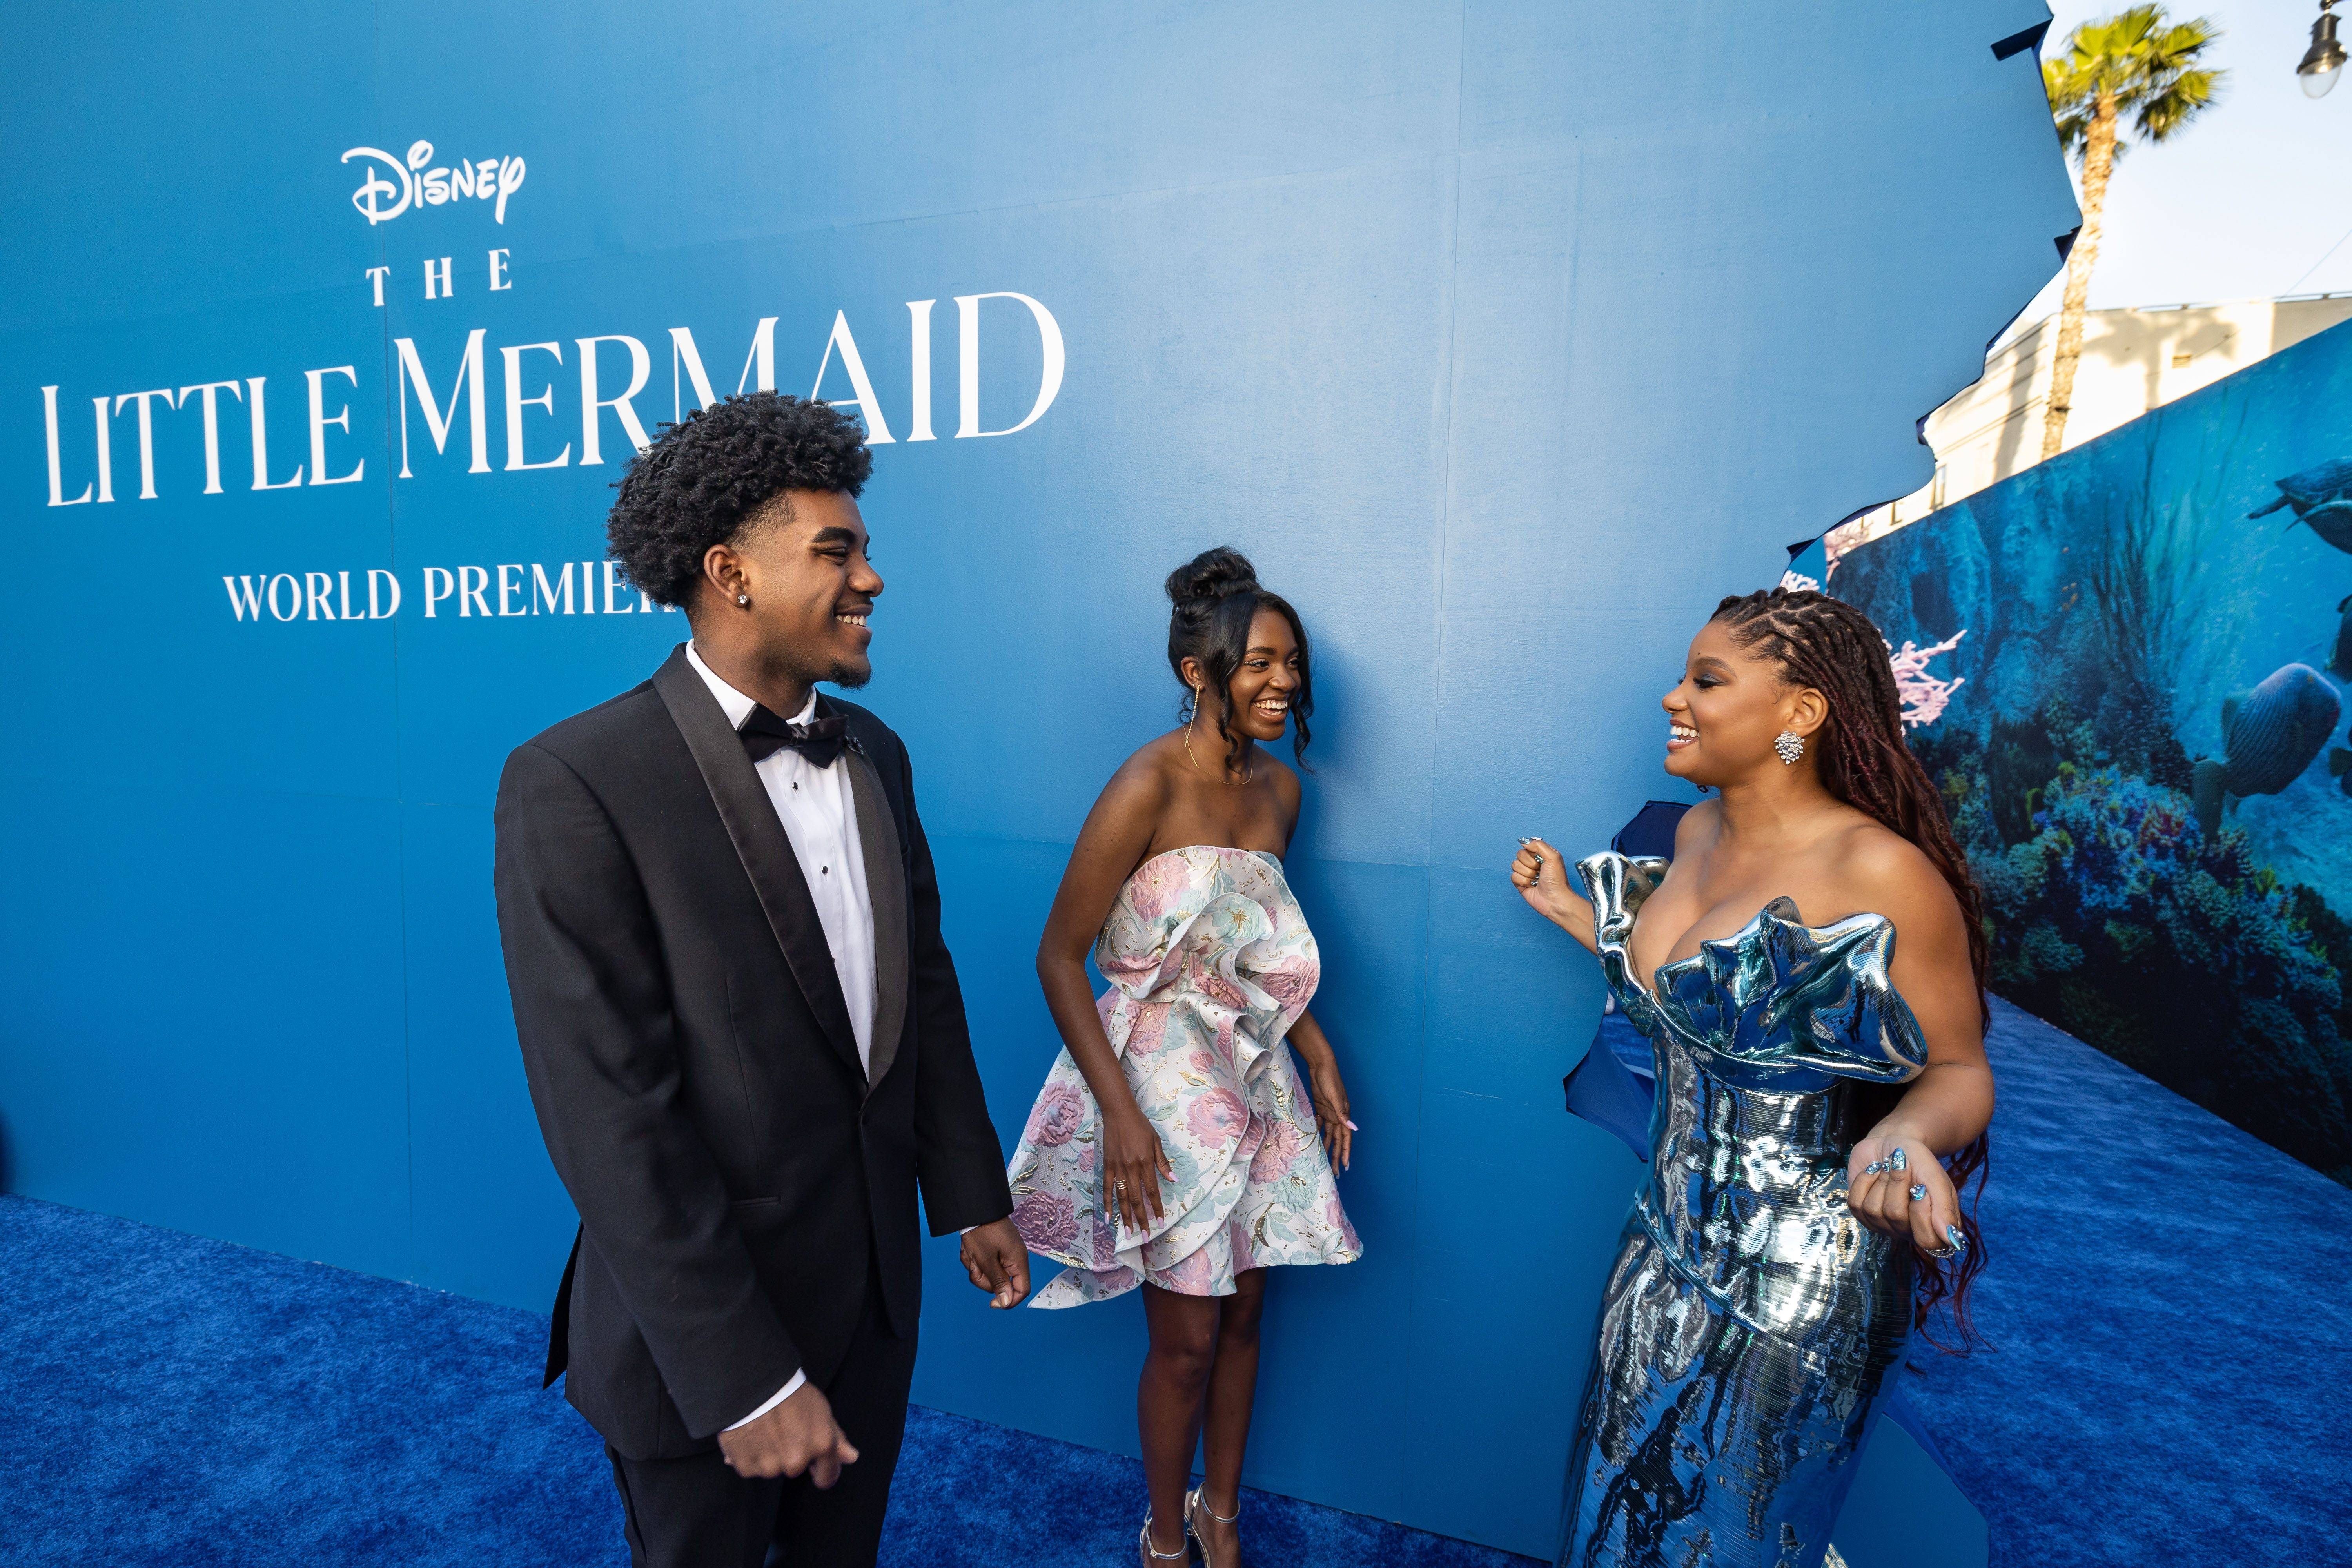 Disney Dreamers attend 'The Little Mermaid' World Premiere with the movie's star Halle Bailey